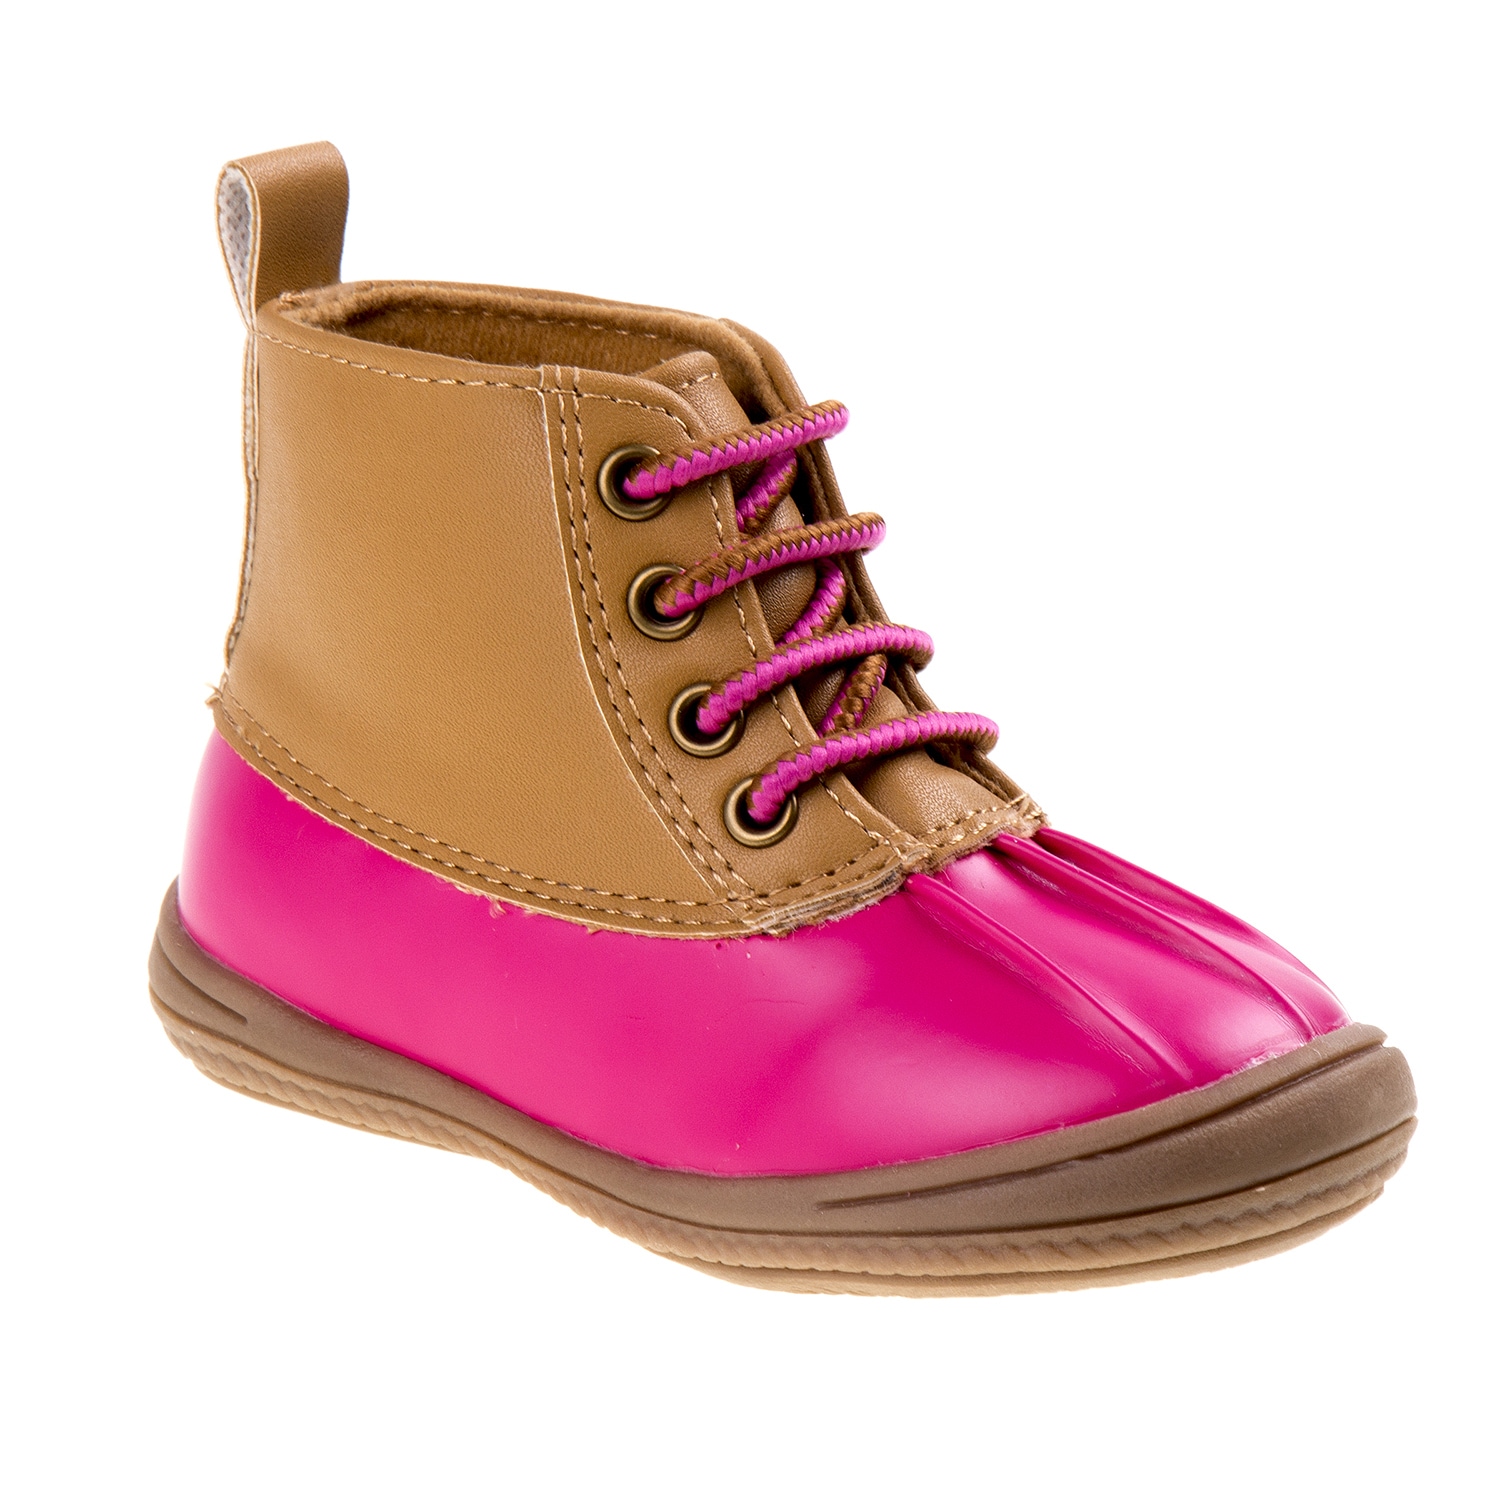 pink duck boots